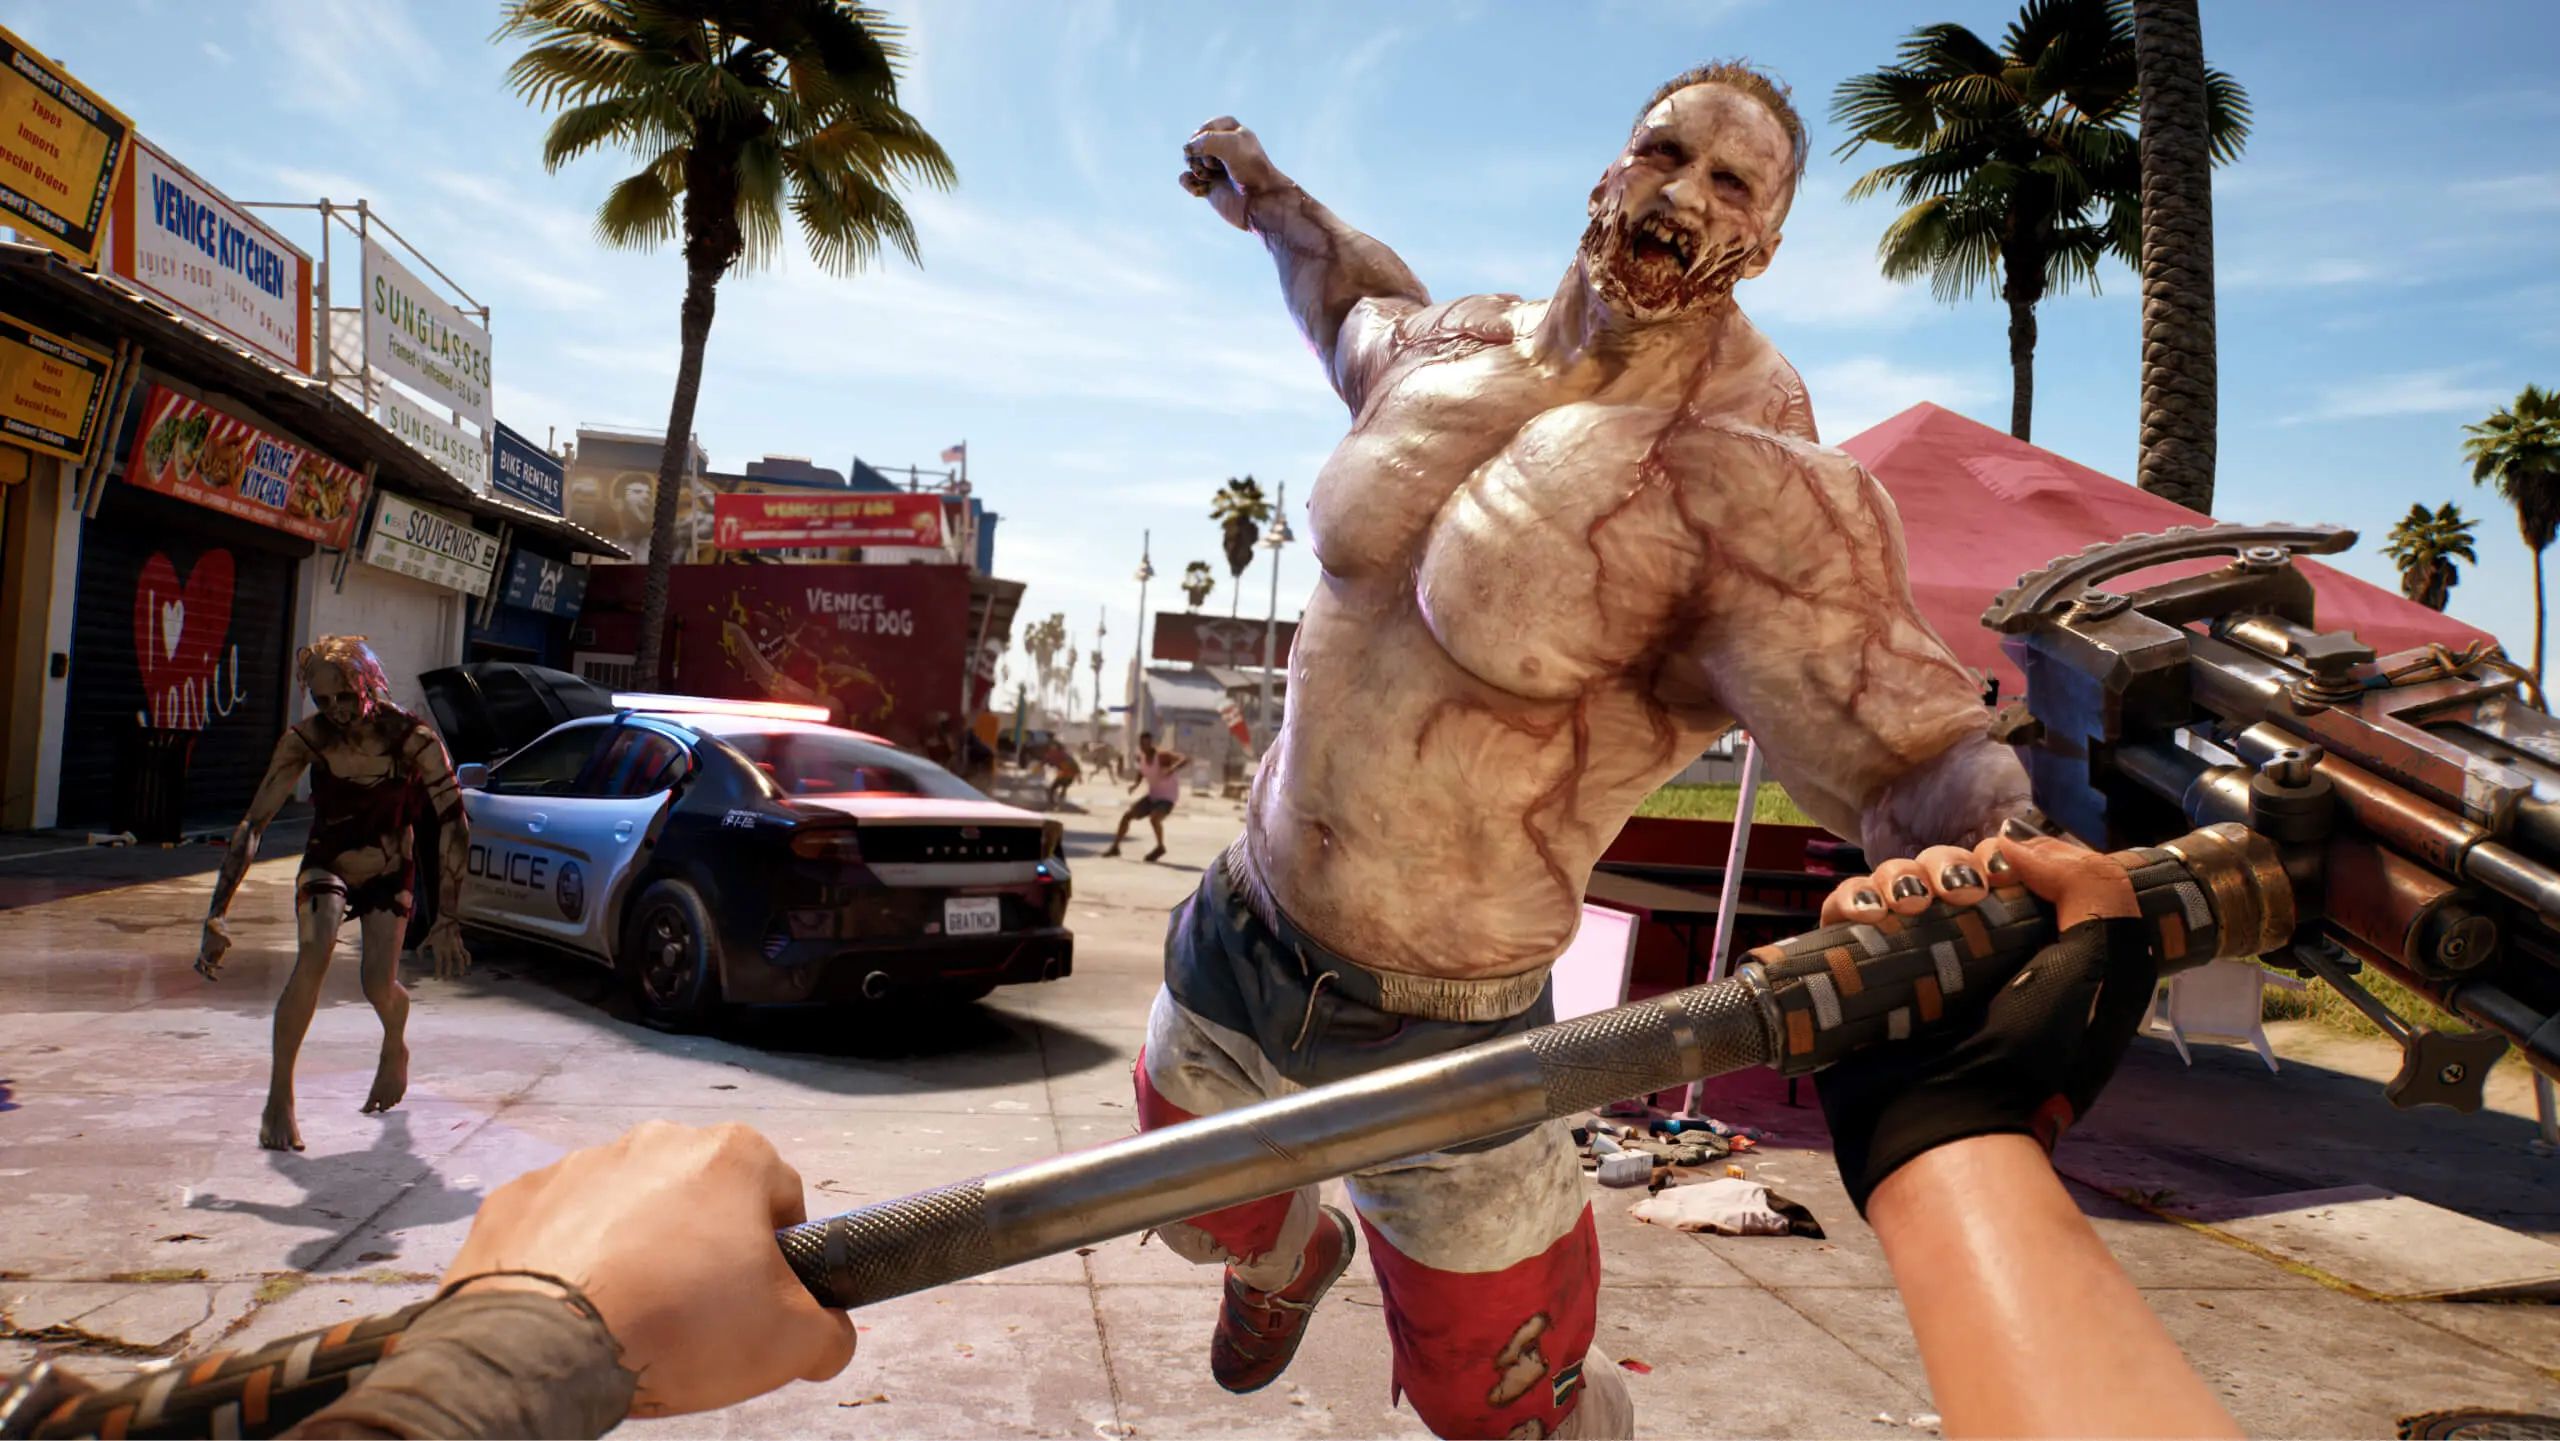 A screenshot from Dead Island 2 showing a muscular zombie about to punch the player, who holds up a iron pipe in defense